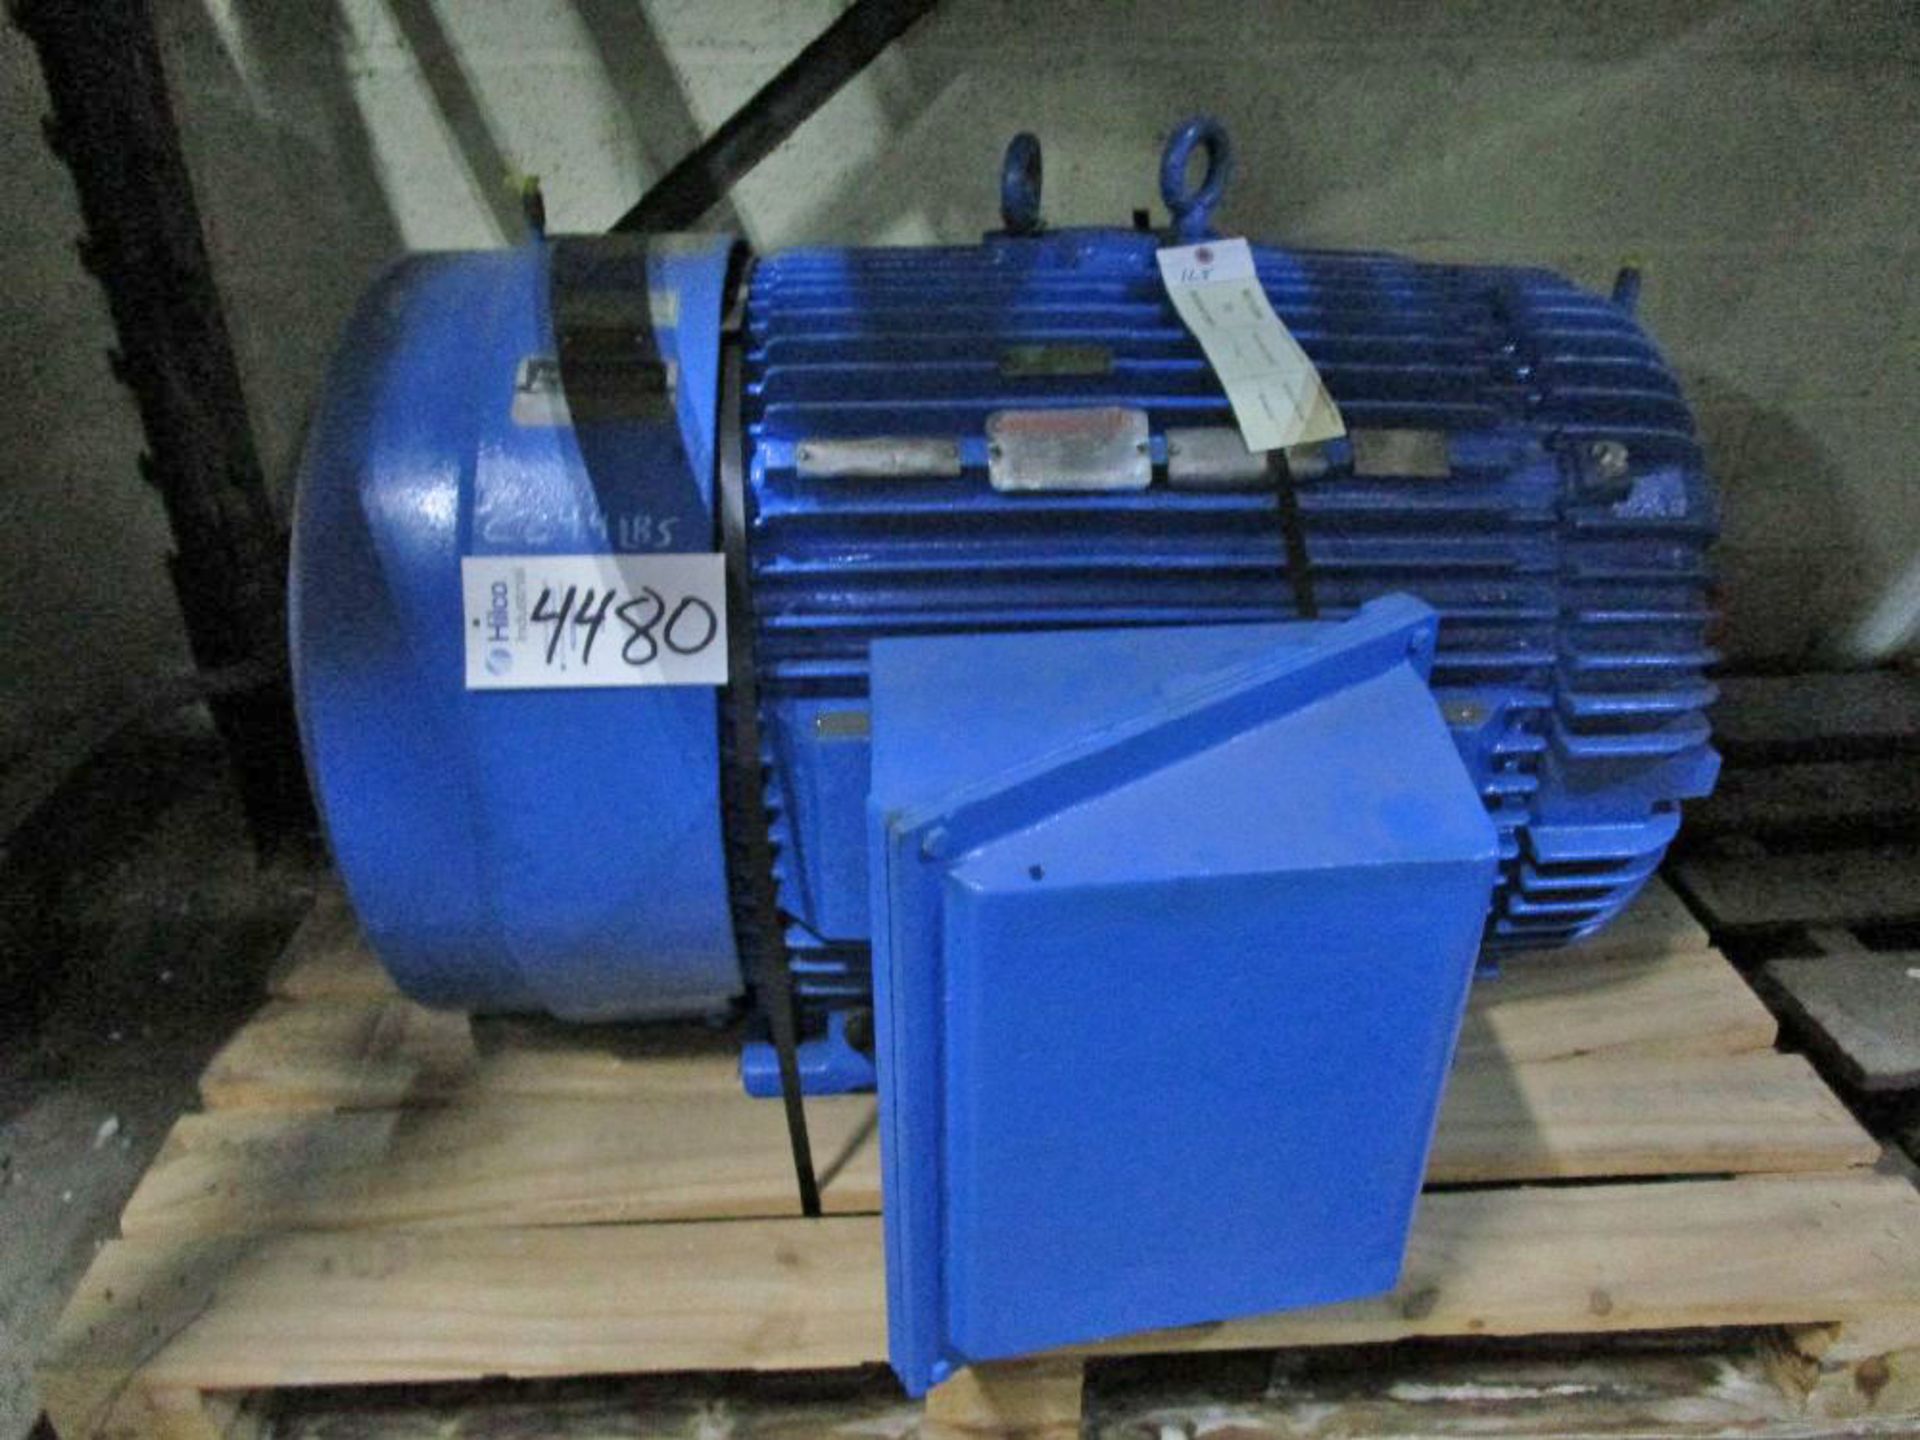 Reliance Electric Model Duty Master 200 HP Electric Induction Motor